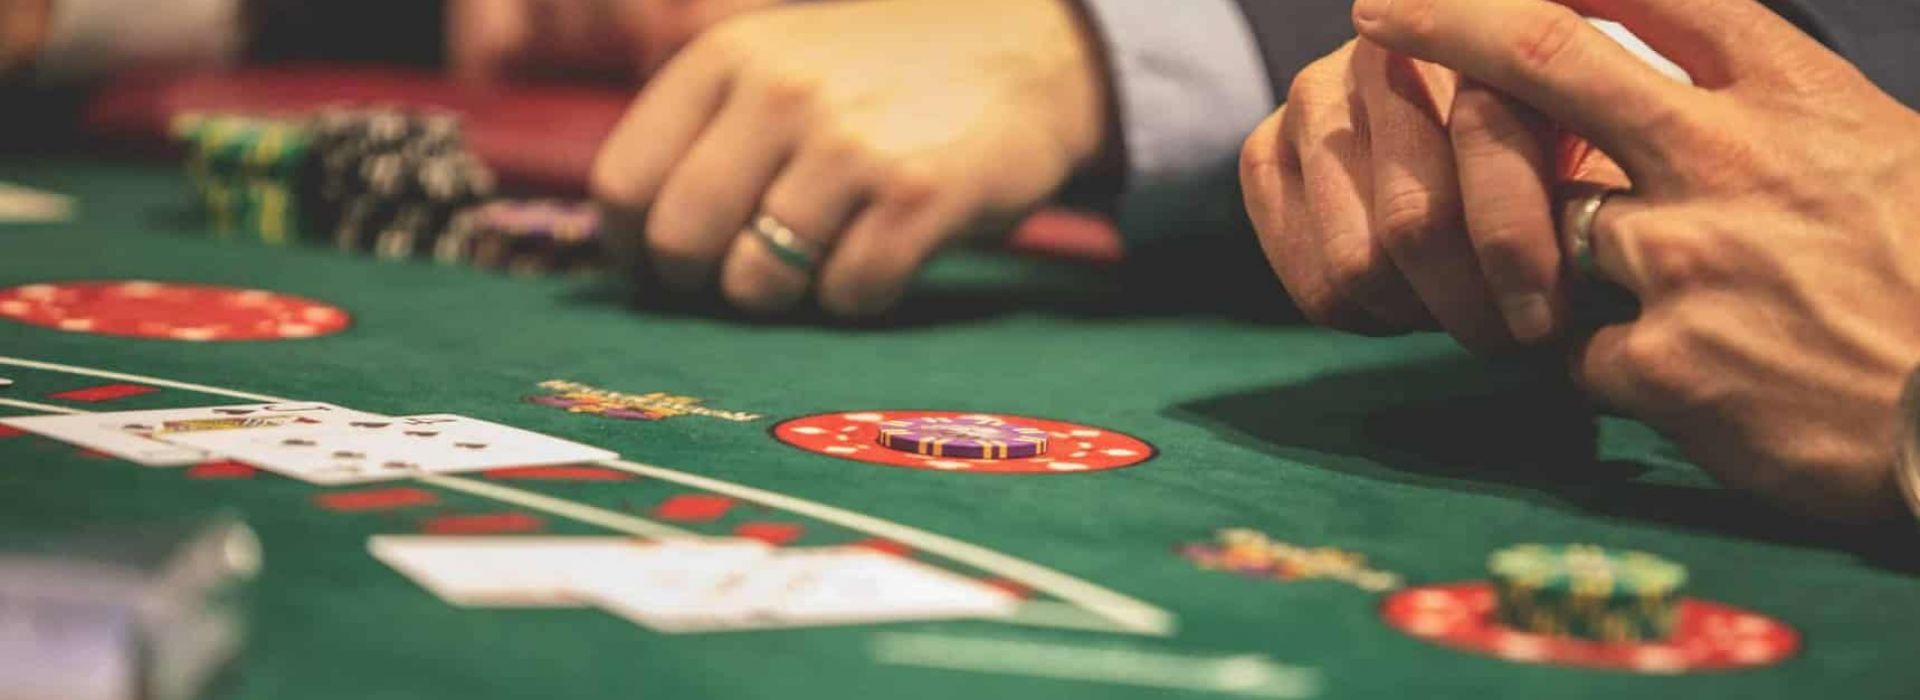 Getting Help for Gambling Addiction